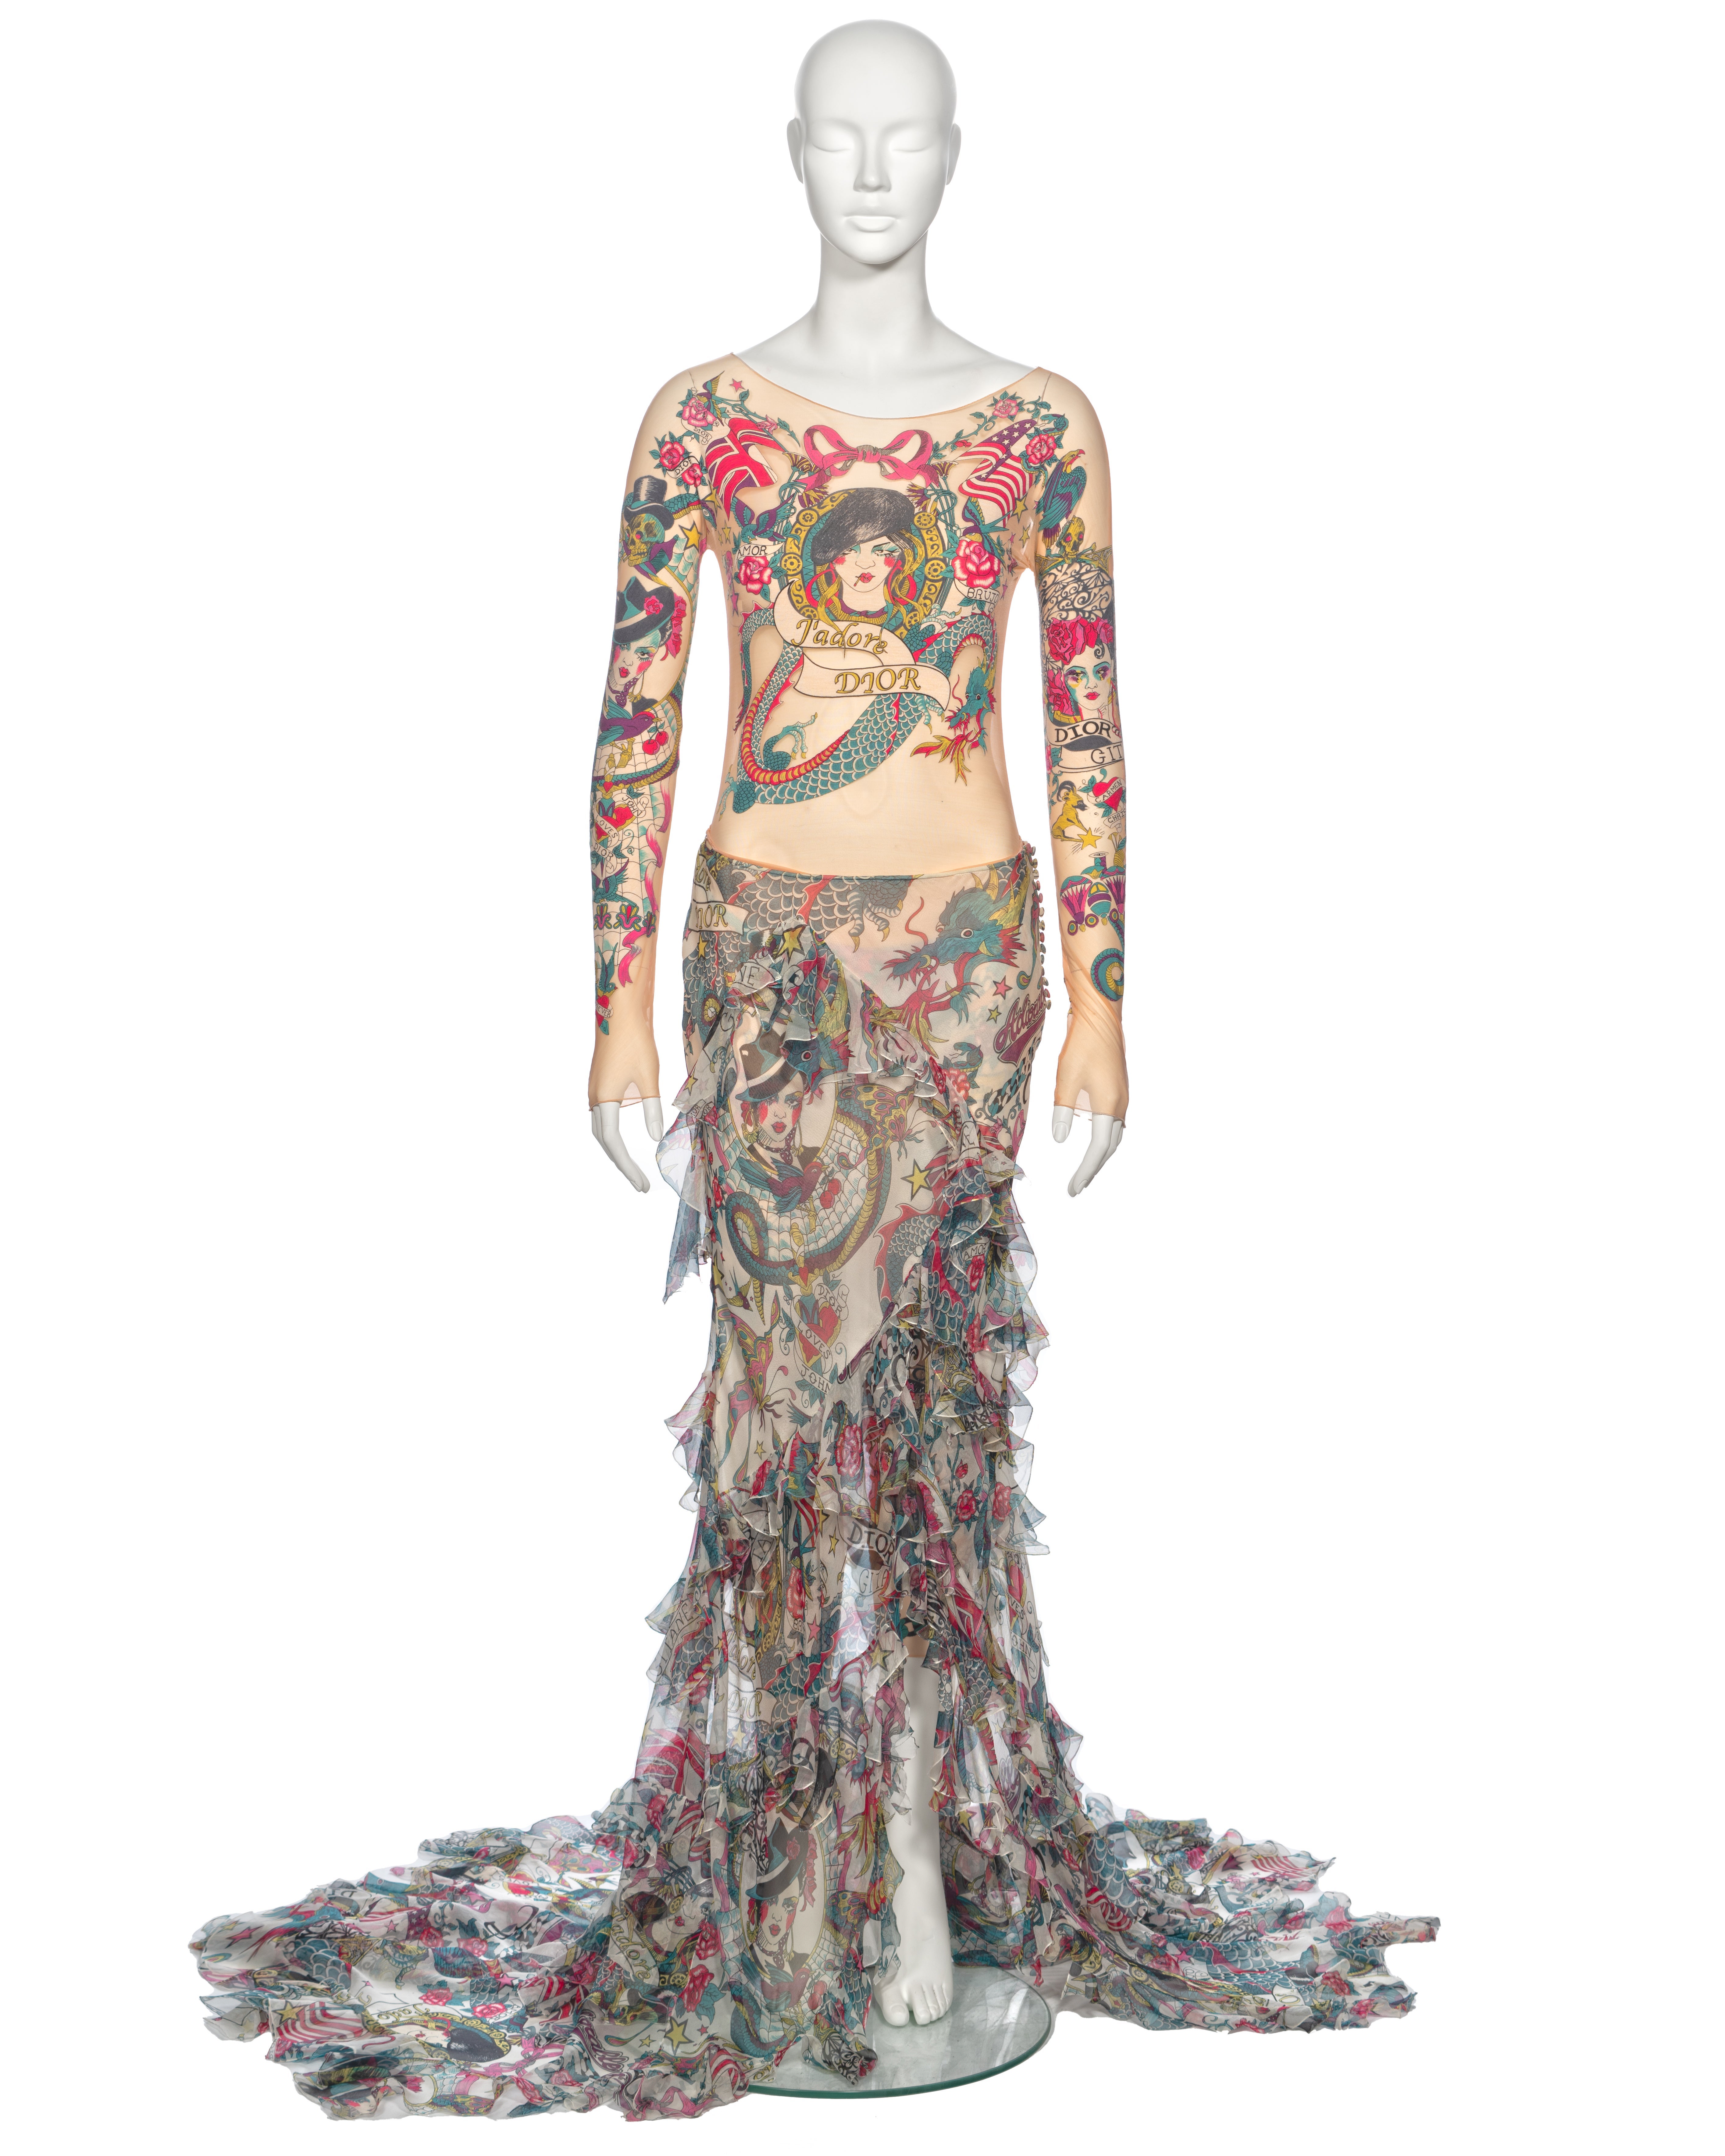 Christian Dior by John Galliano Tattoo Print Body, Leggings and Skirt, ss 2004 For Sale